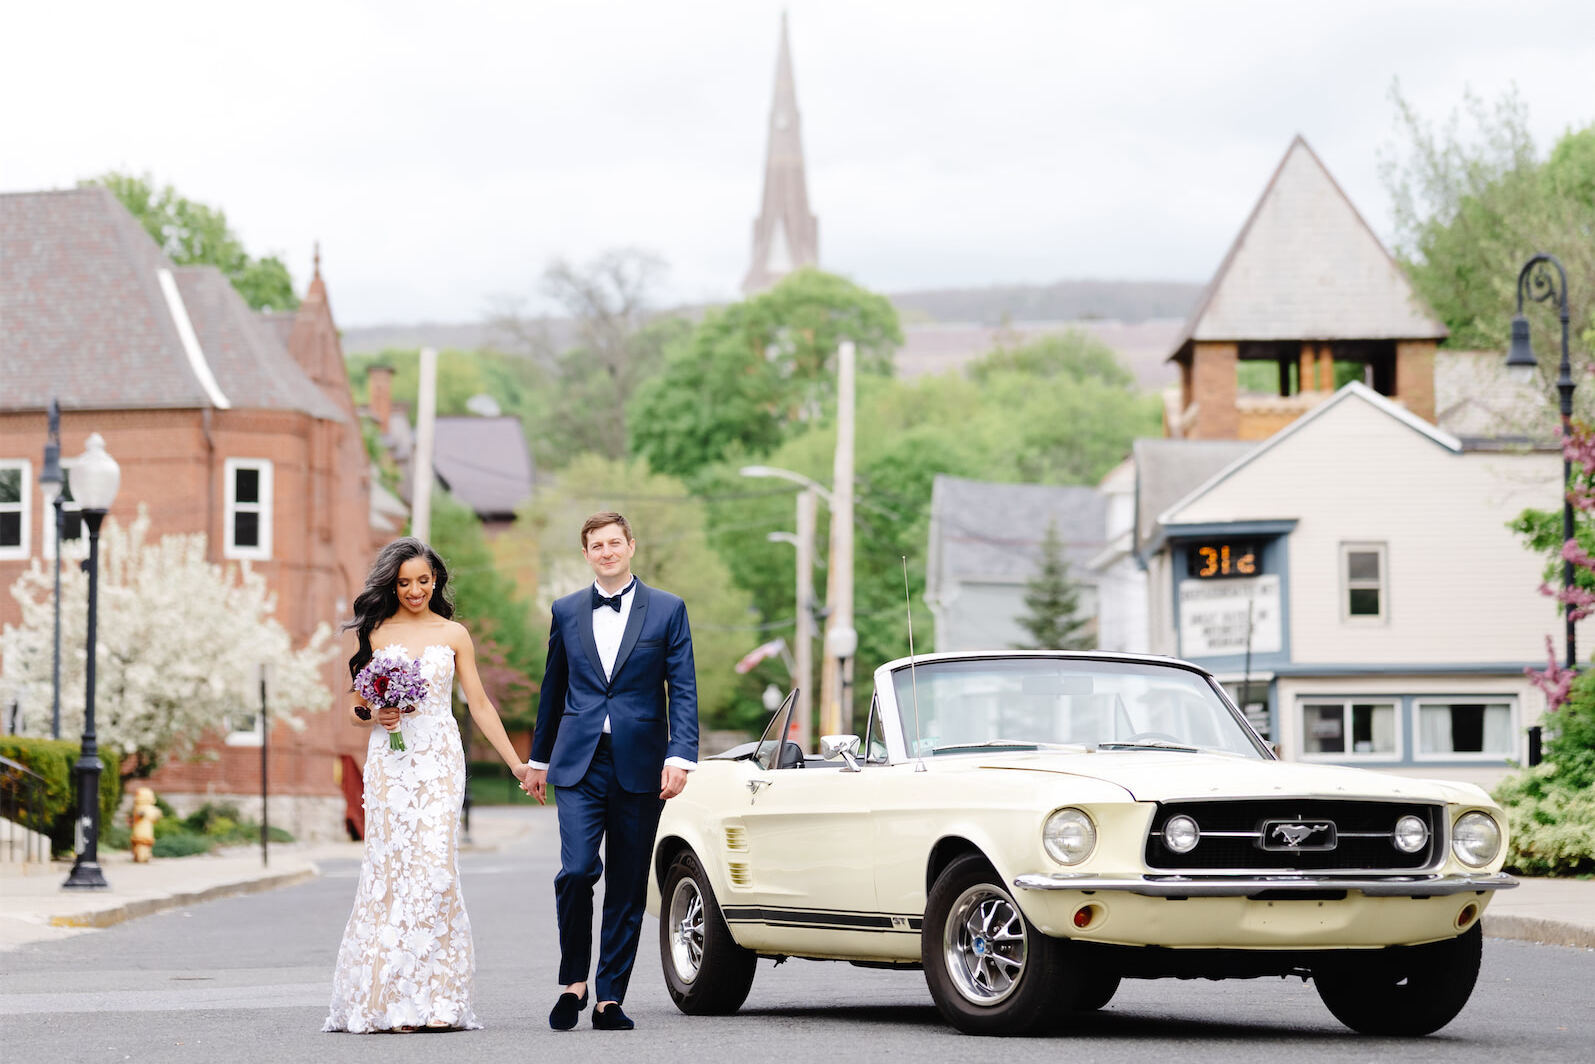 A bride and groom pose by a rented vintage car that they used to get to their art museum wedding.